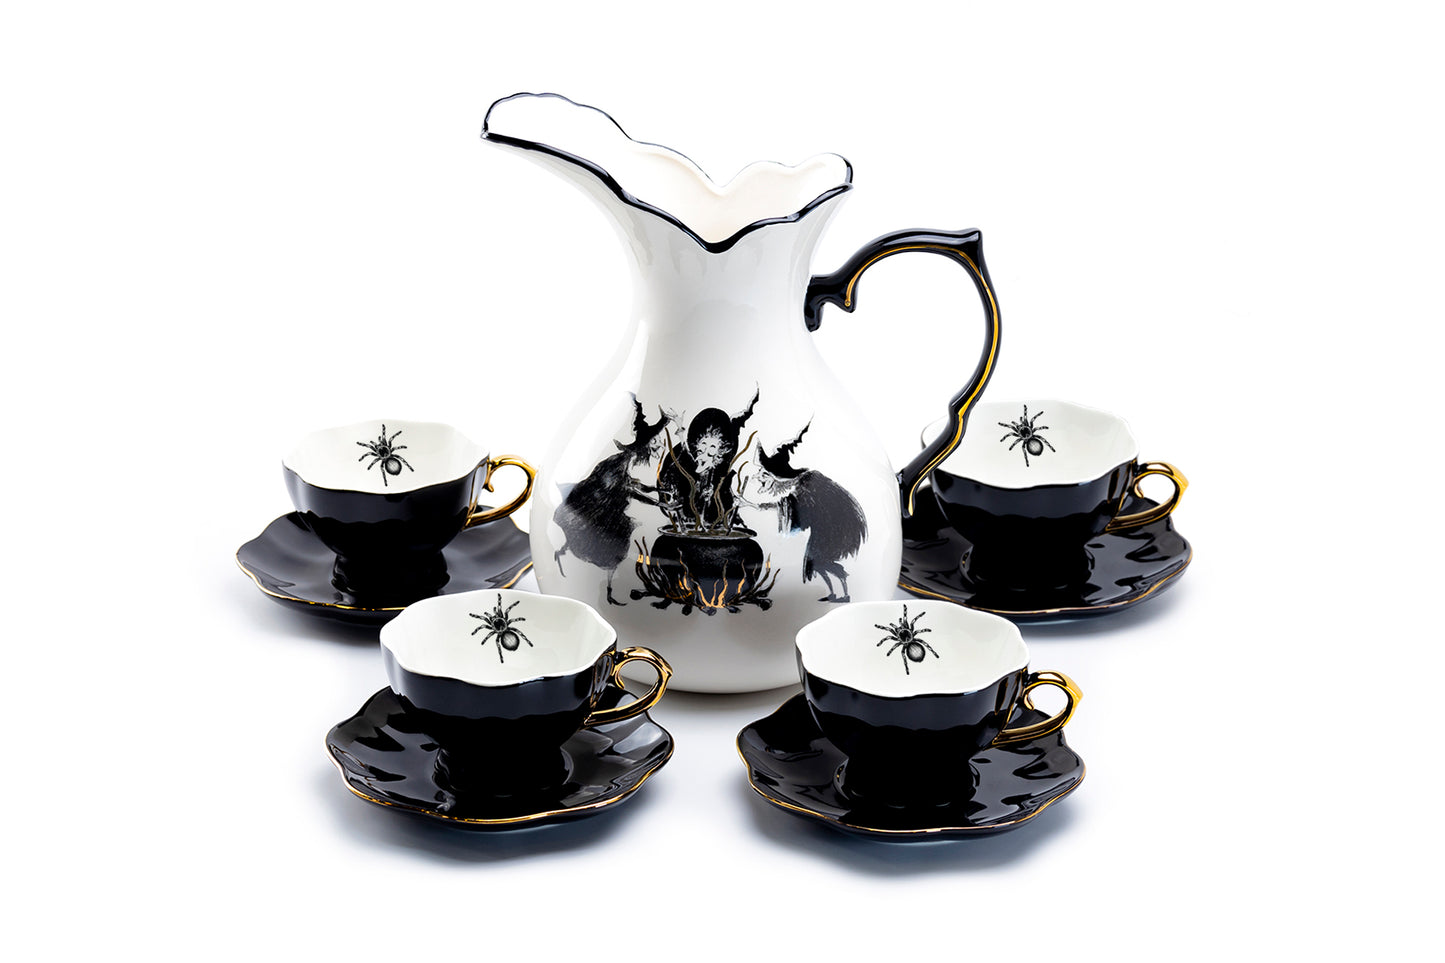 Potter's Studio Witches Brew Pitcher + 4 Black widow Spider Halloween Tea Cup and Saucer Sets